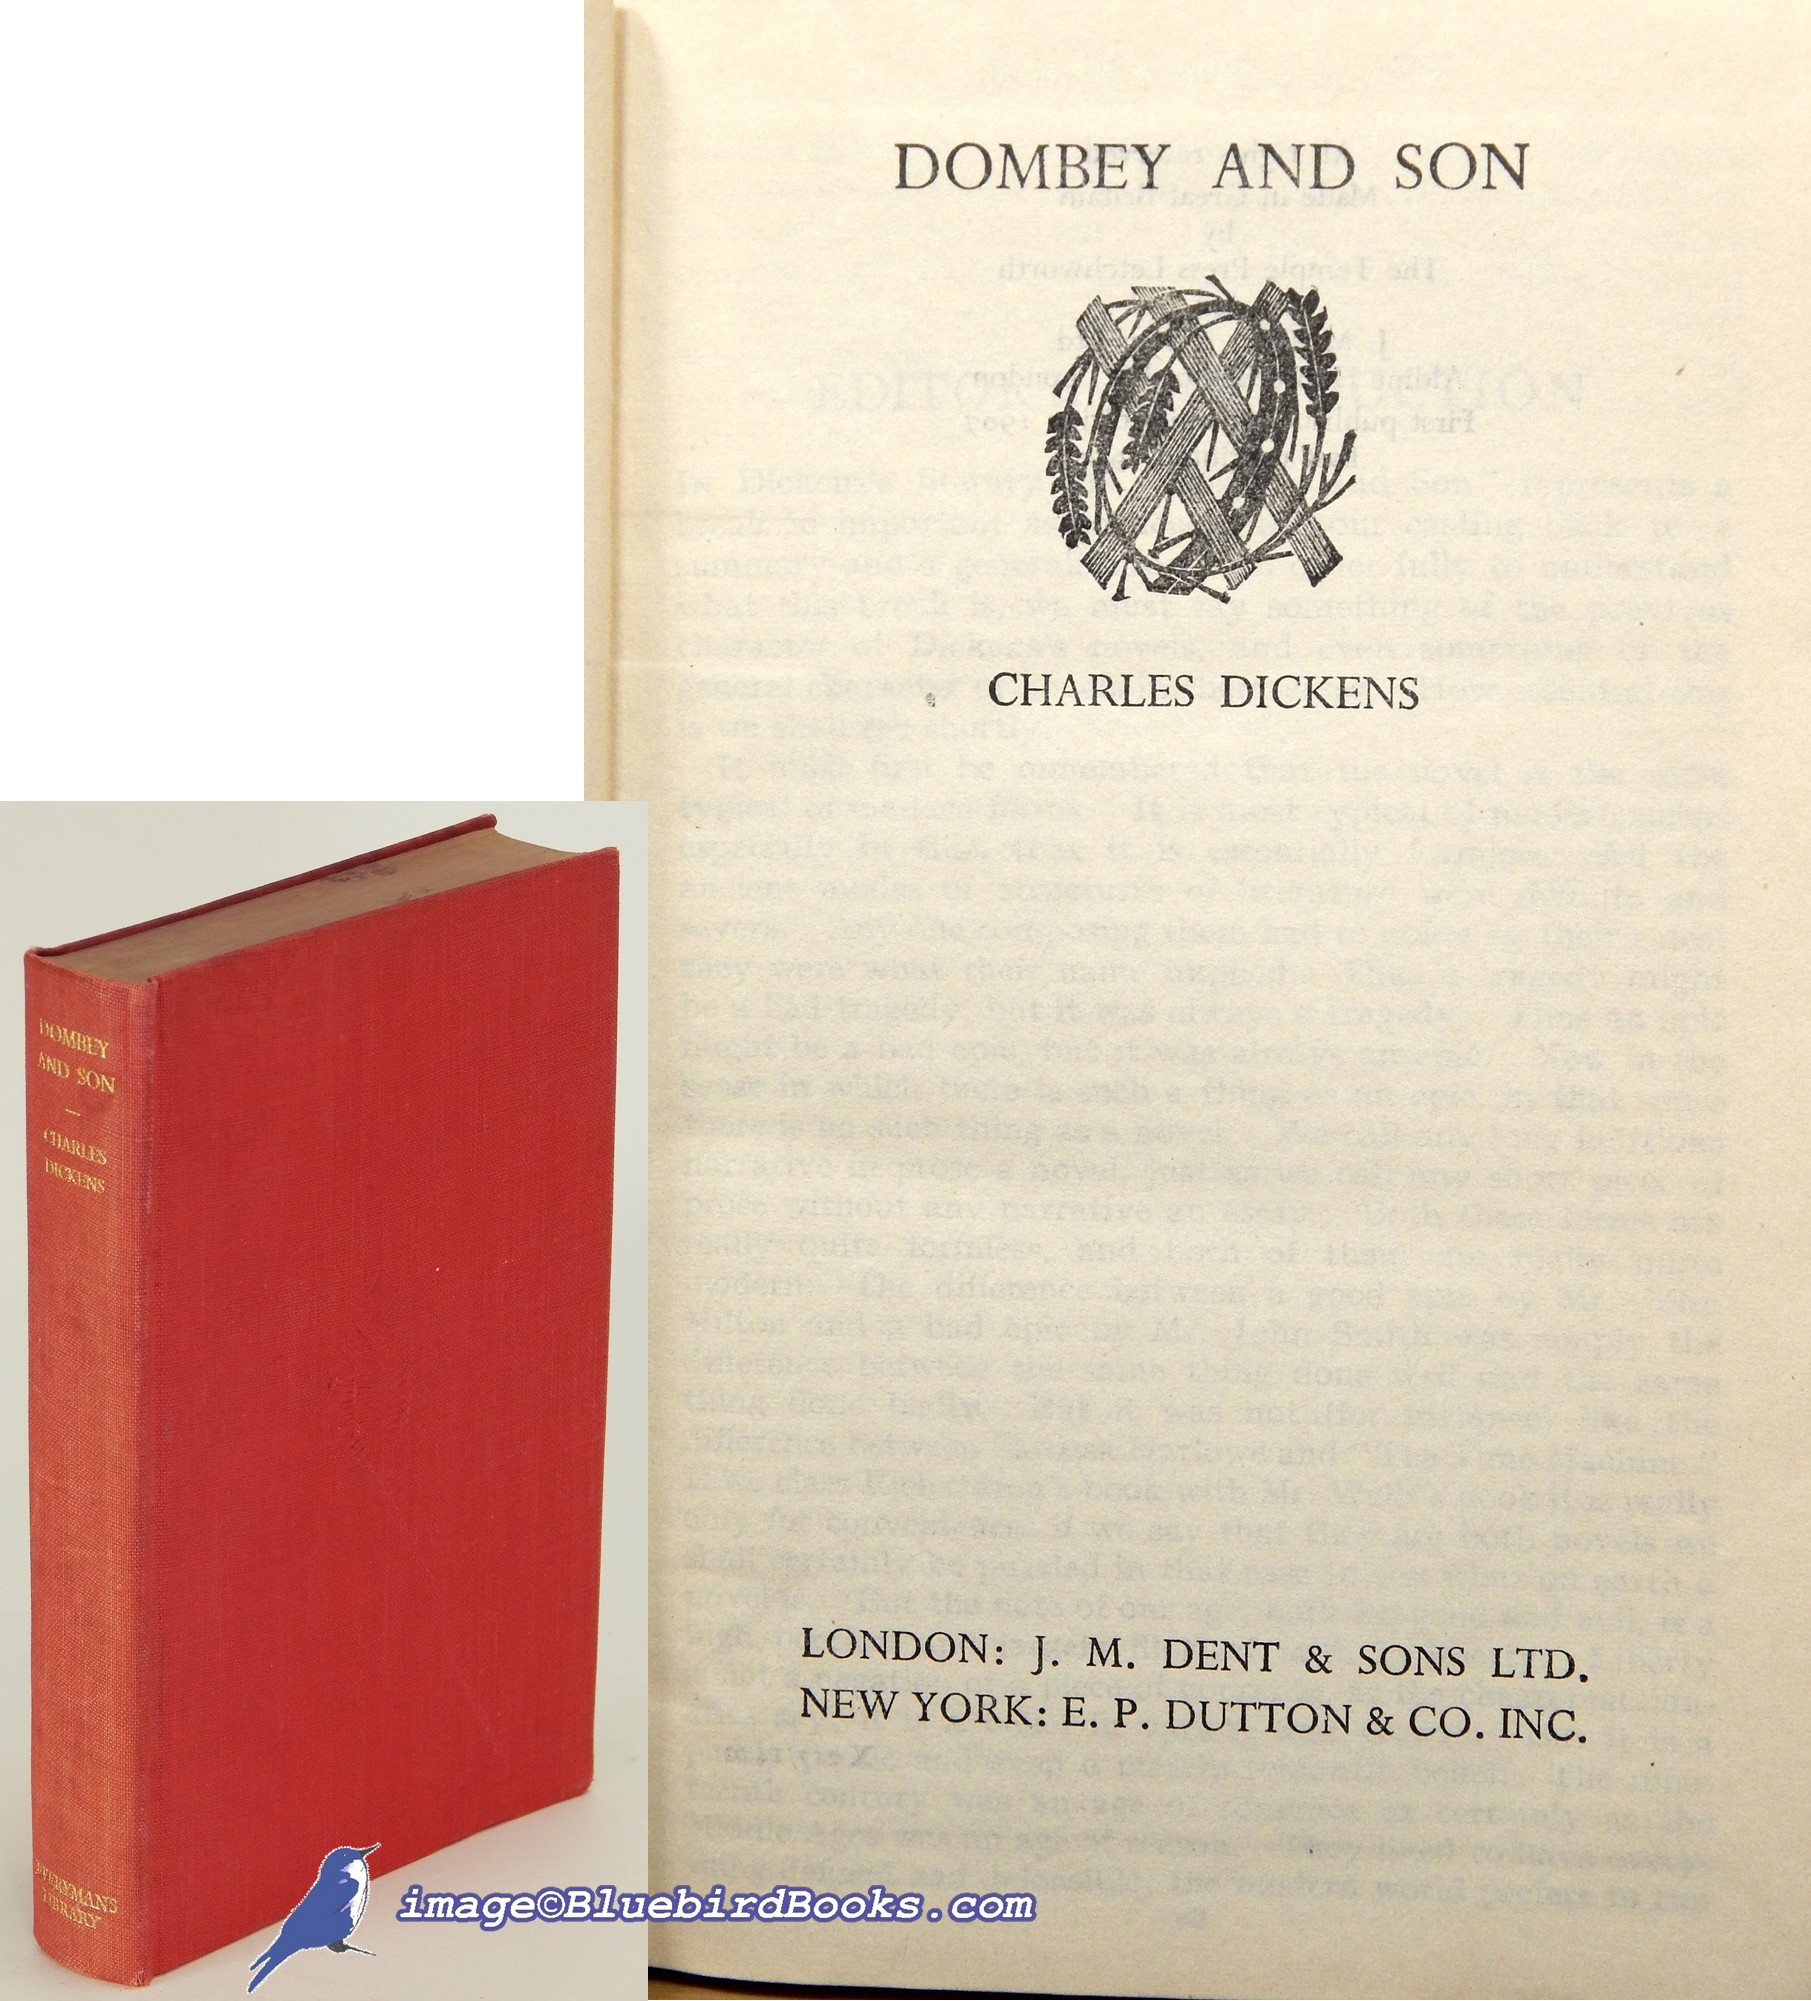 DICKENS, CHARLES (AUTHOR); CHESTERTON, G. K. (INTRODUCTION) - Dombey and Son (Everyman's Library #240)